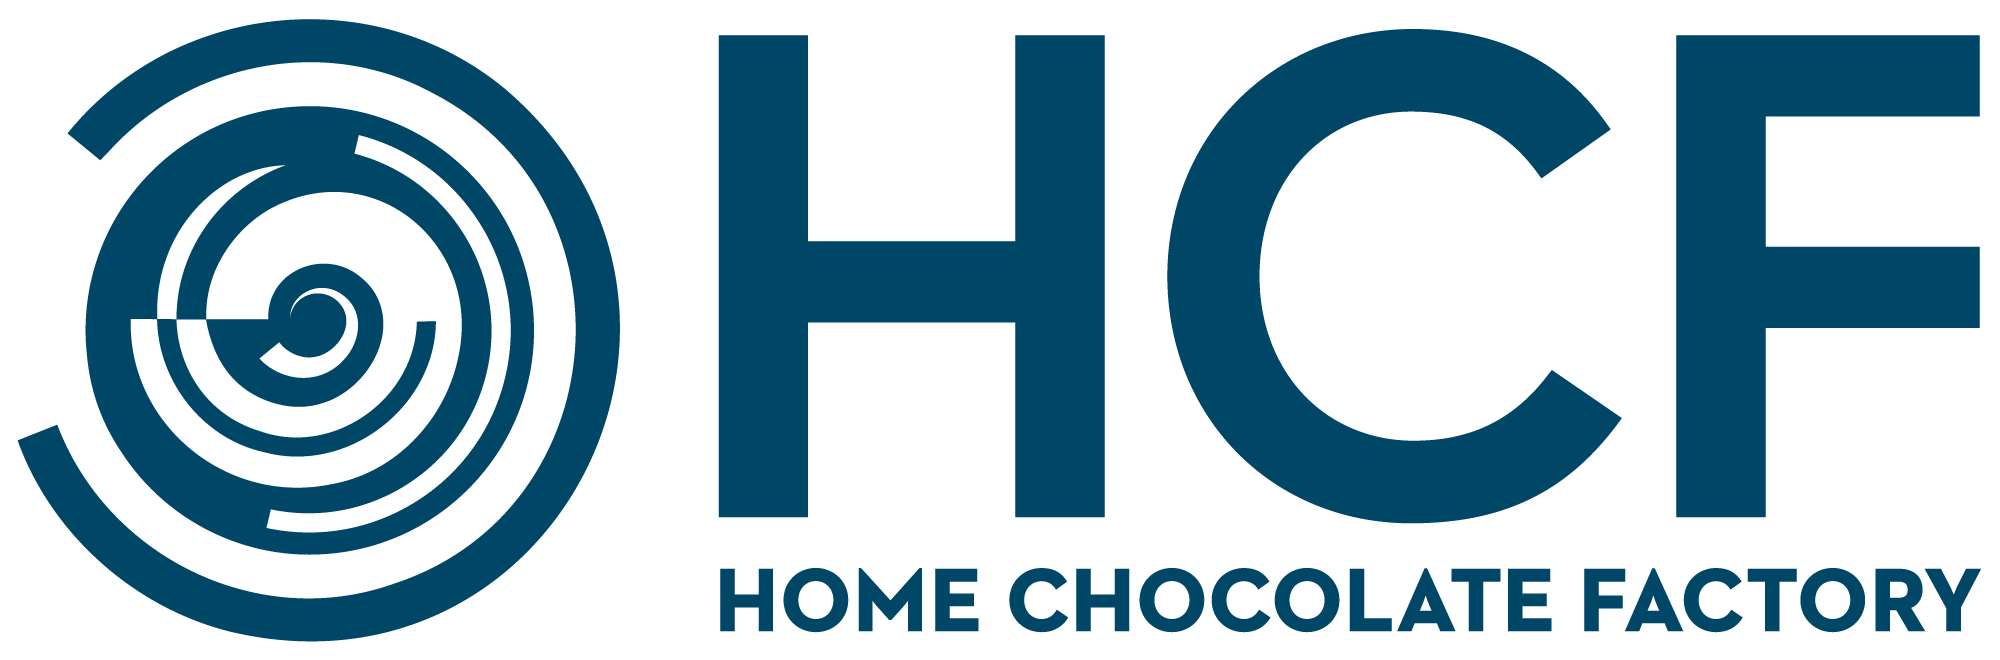 Home Chocolate Factory